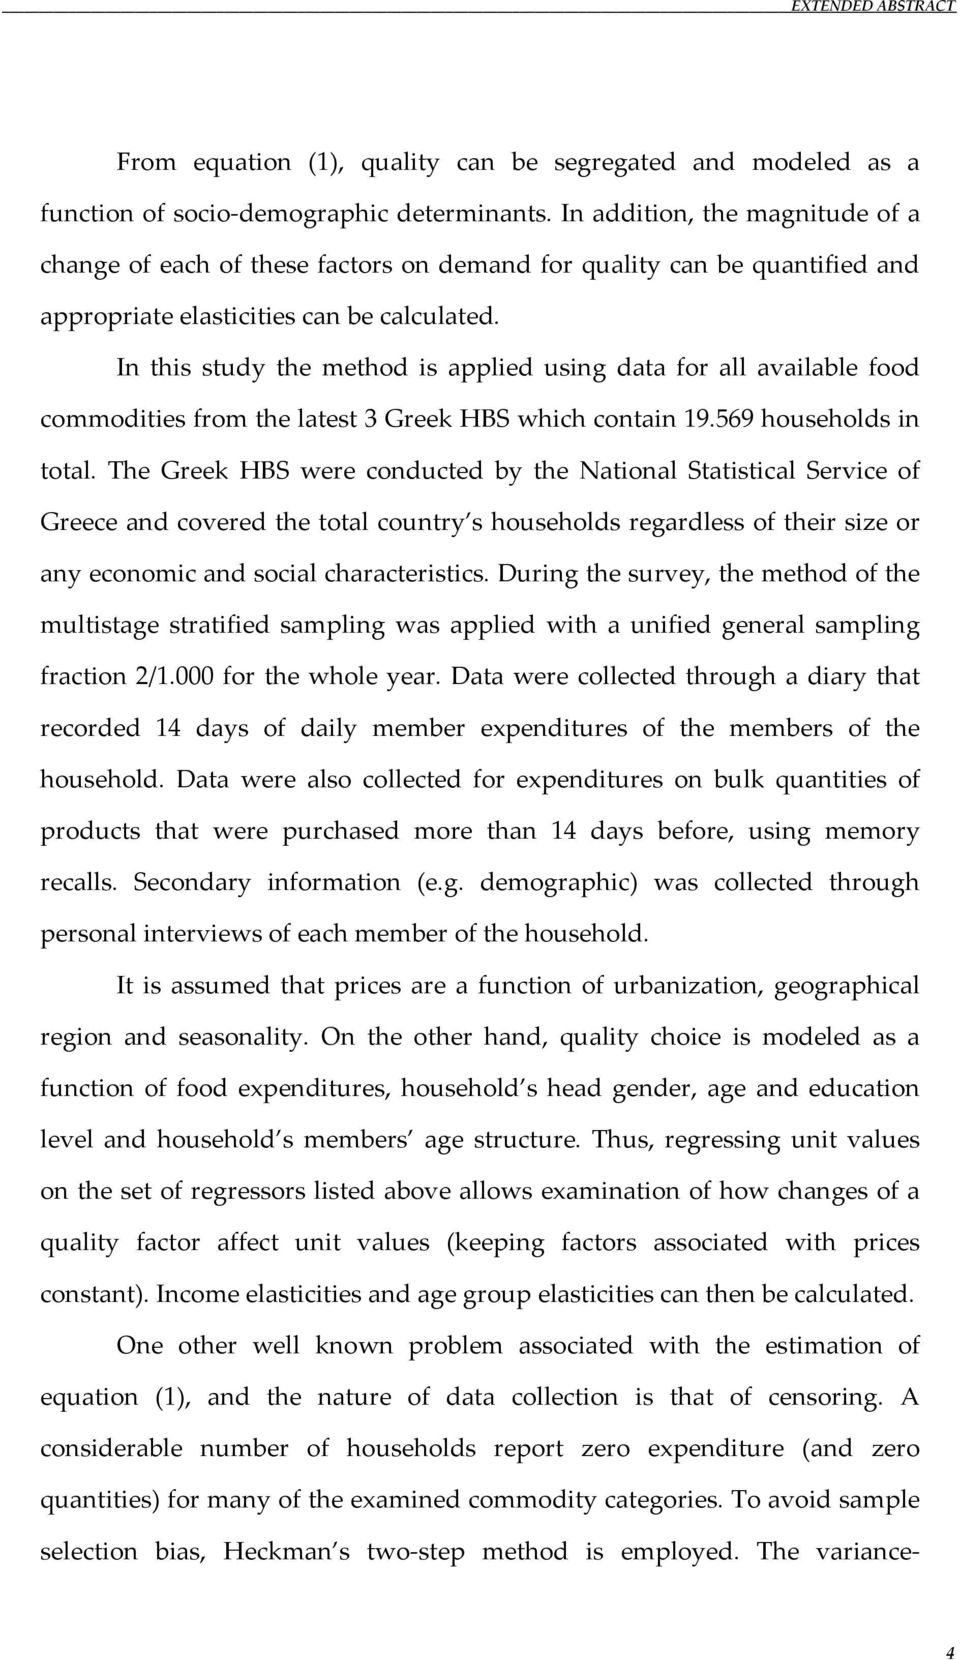 In this study the method is applied using data for all available food commodities from the latest 3 Greek HBS which contain 19.569 households in total.